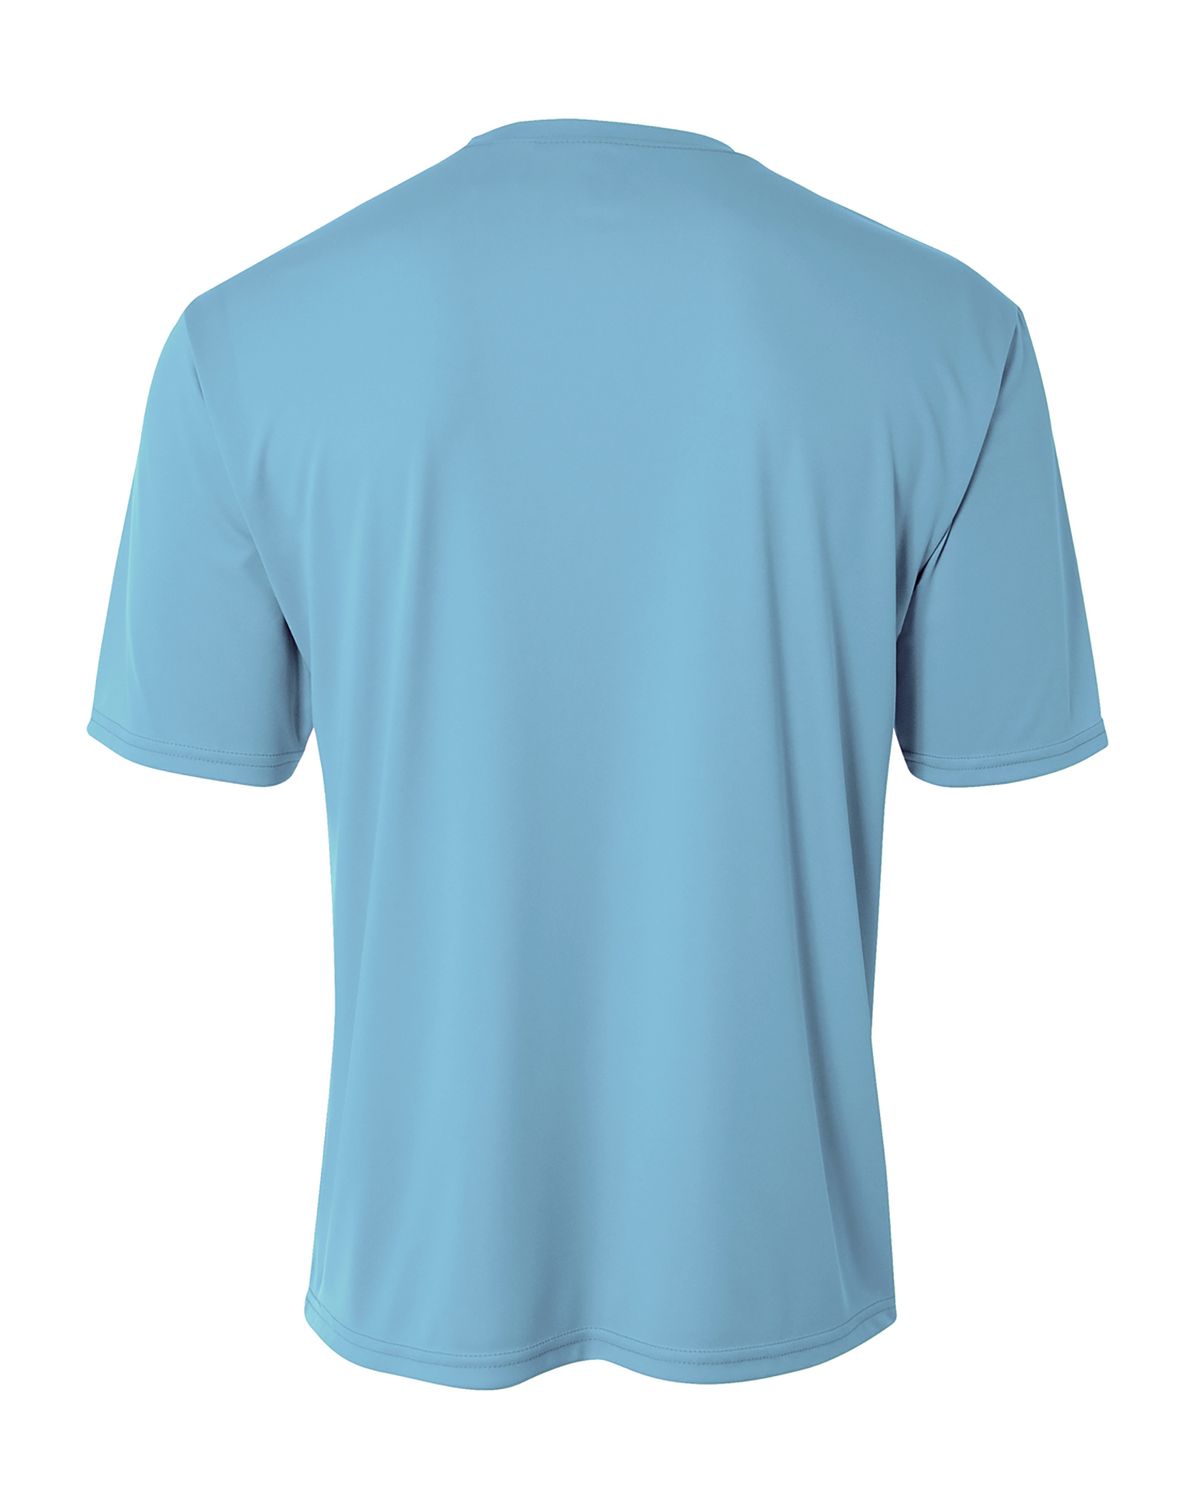 Wholesale A4 NB3142 | Buy Youth Cooling Performance T-Shirt - VeeTrends.com